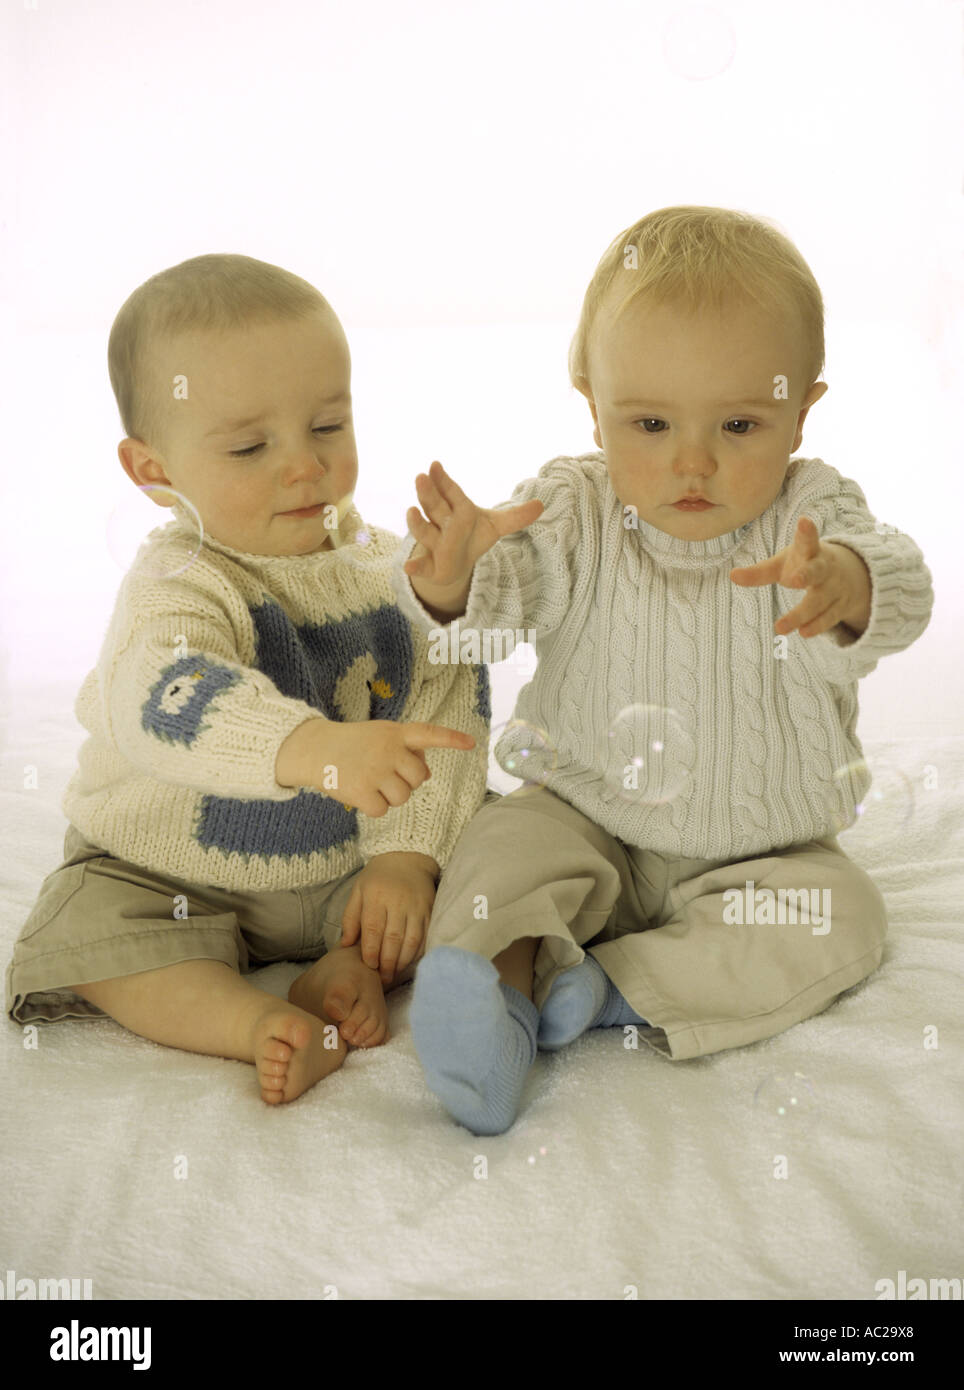 Two baby boys playing together happily with bubbles Stock Photo